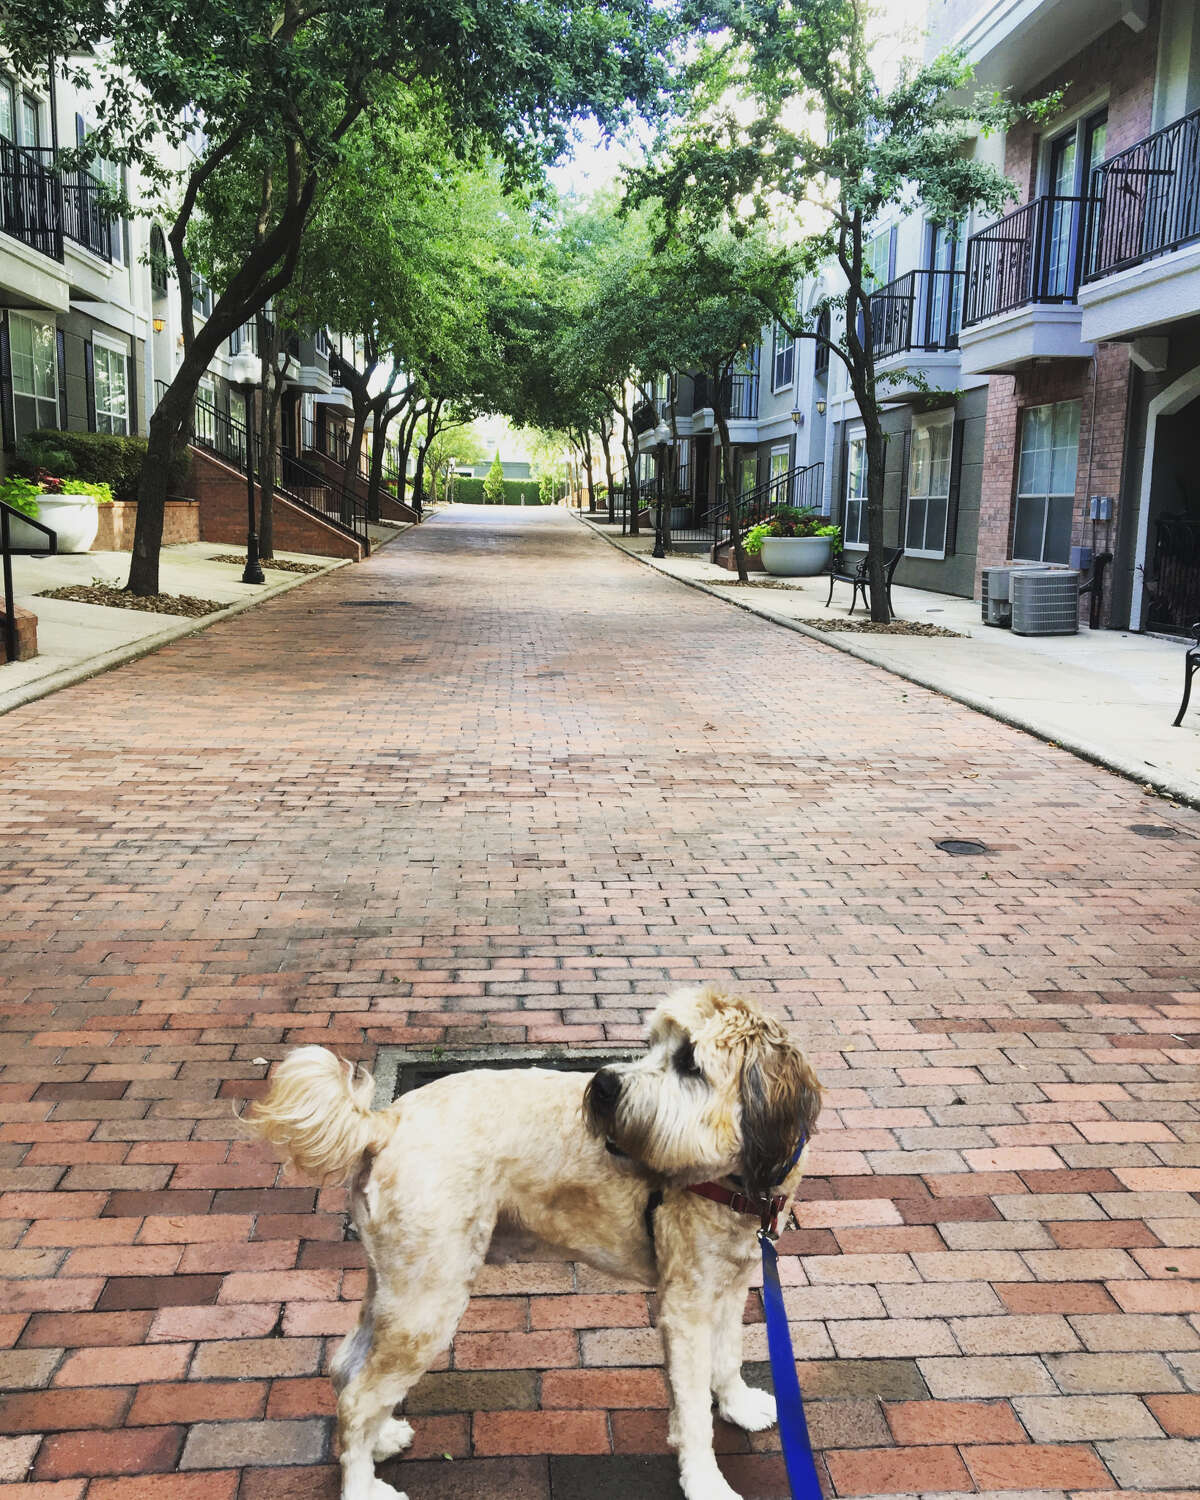 Houston Chronicle reporter Maggie Gordon's wheaten terrier, Teddy, was told "he's looking a little chubby" at a recent vet check-up. At 57 pounds, he's way over the average weight for his breed, and according to his vet, one of the 56 percent of American dogs who are overweight or obese.